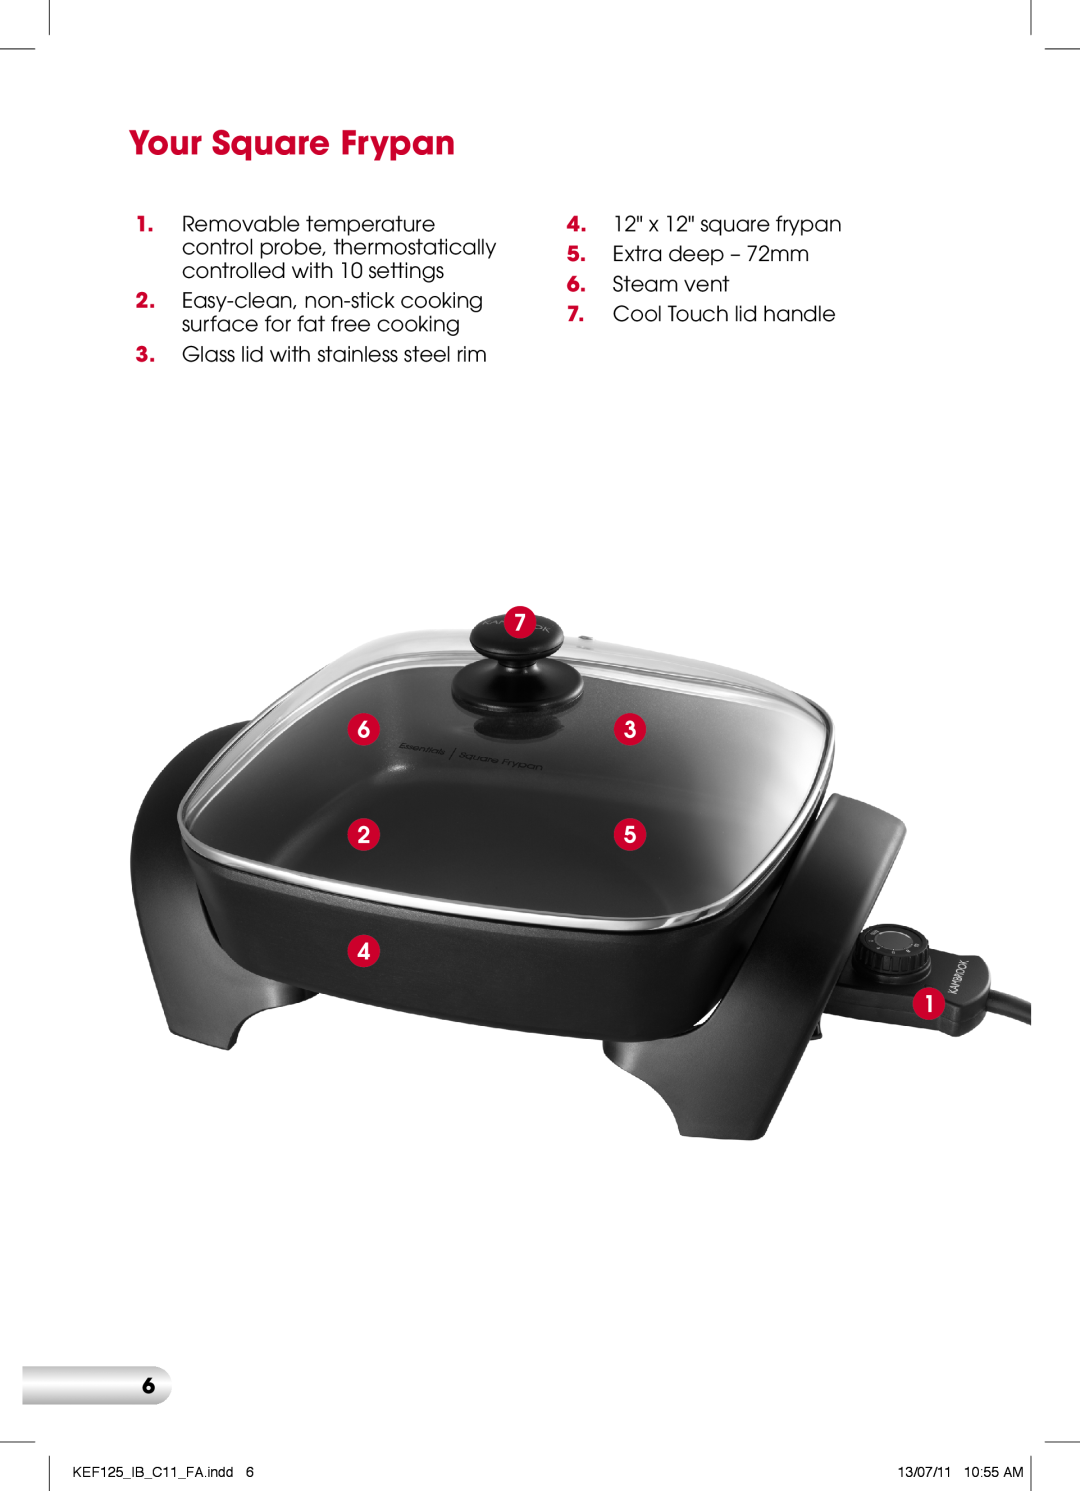 Kambrook KEF125 Your Square Frypan, Easy-clean, non-stick cooking surface for fat free cooking, Cool Touch lid handle 